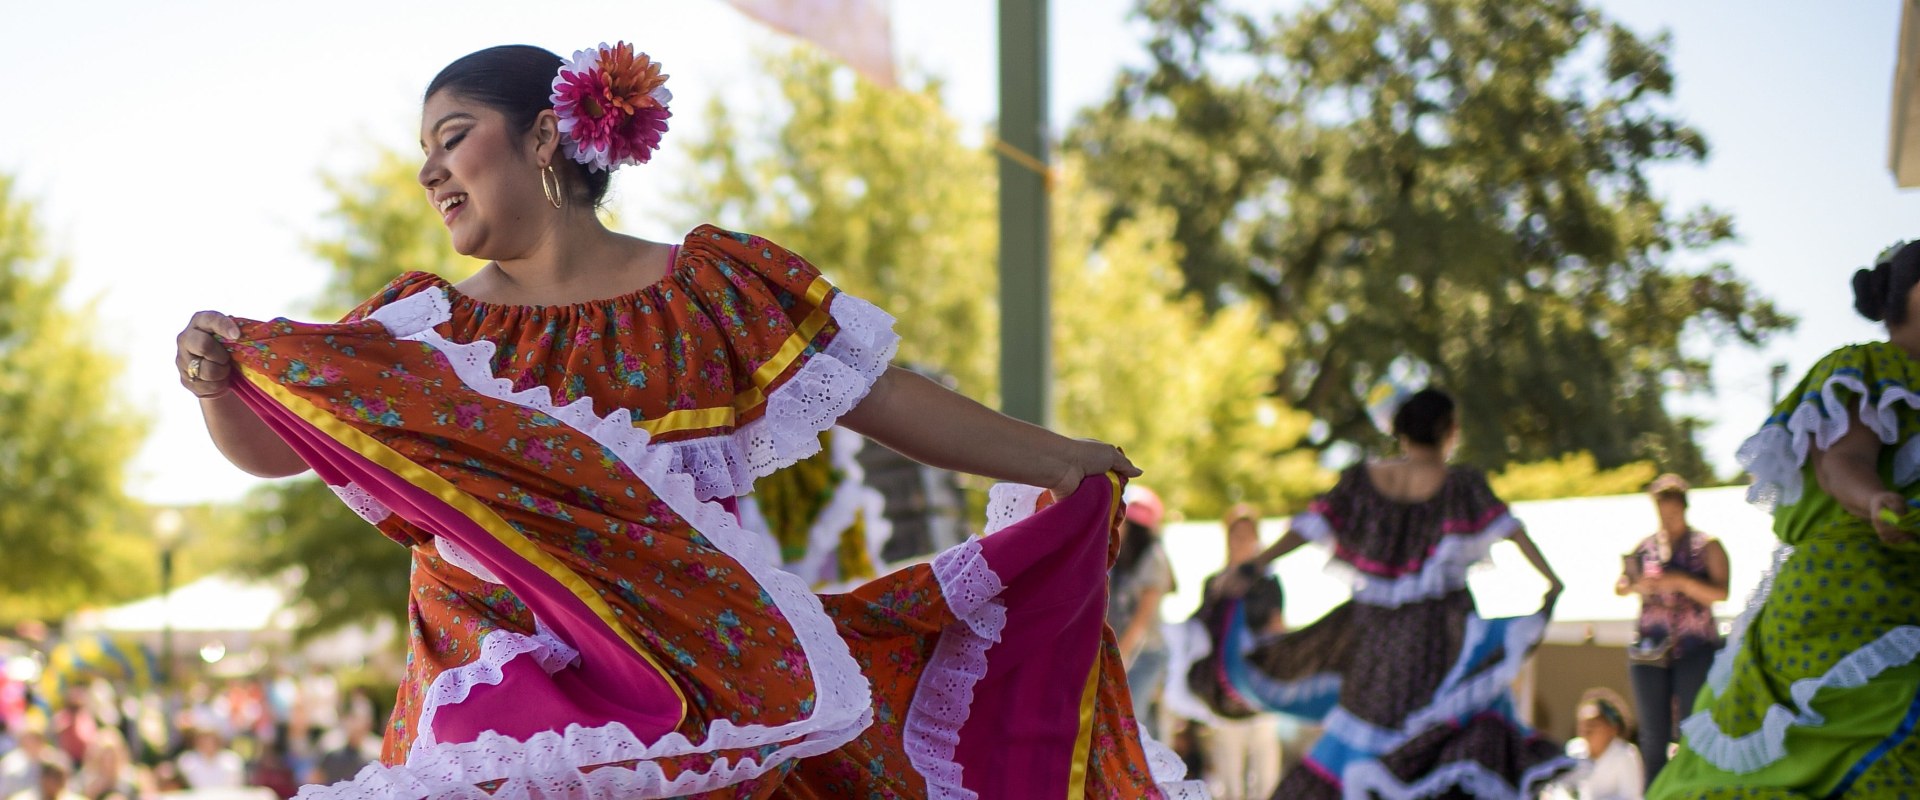 Supporting Louisiana's Cultural Events: How to Show Your Appreciation